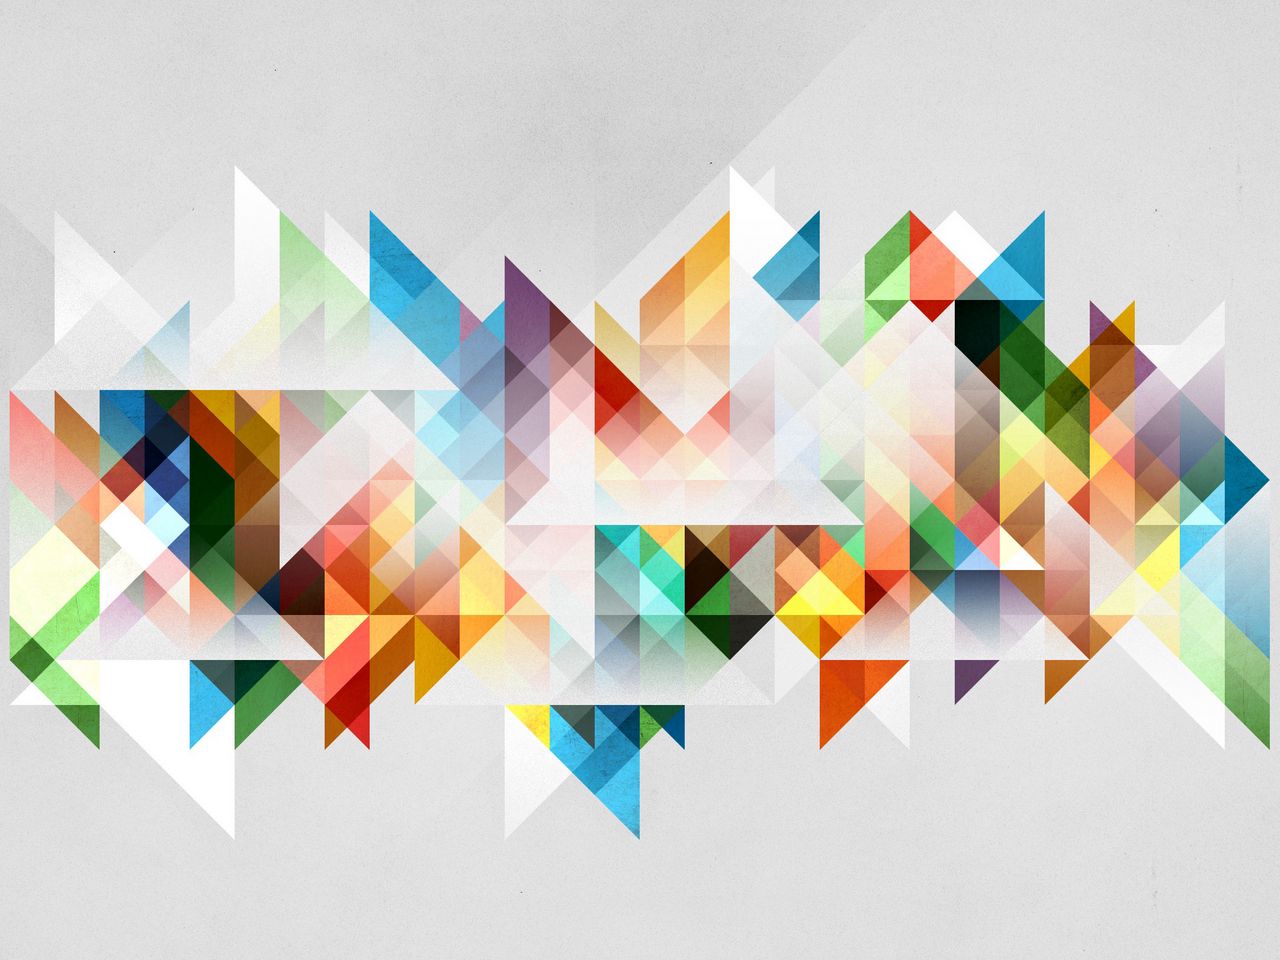 Download wallpaper 1280x960 abstraction, geometry, shapes, colors standard  4:3 hd background